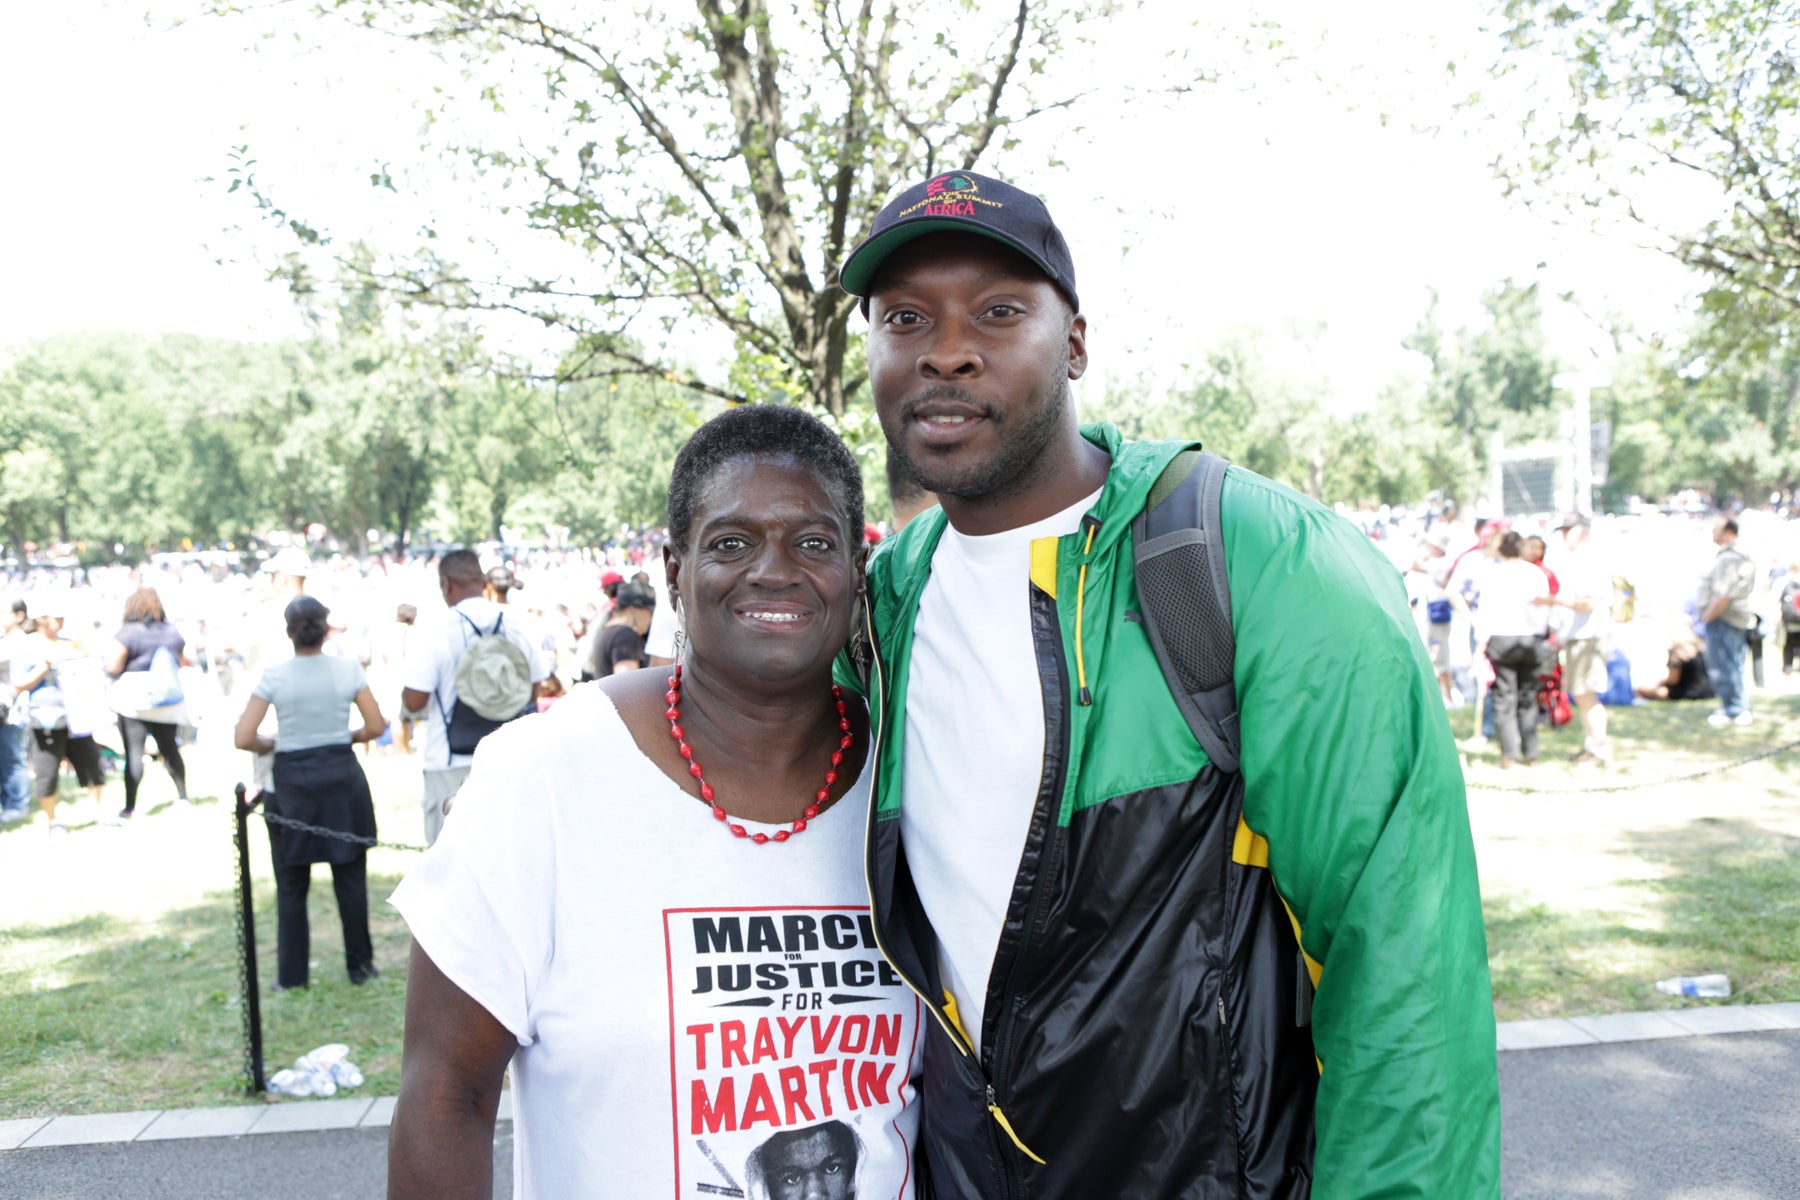 March on Washington 2013: View from the Ground